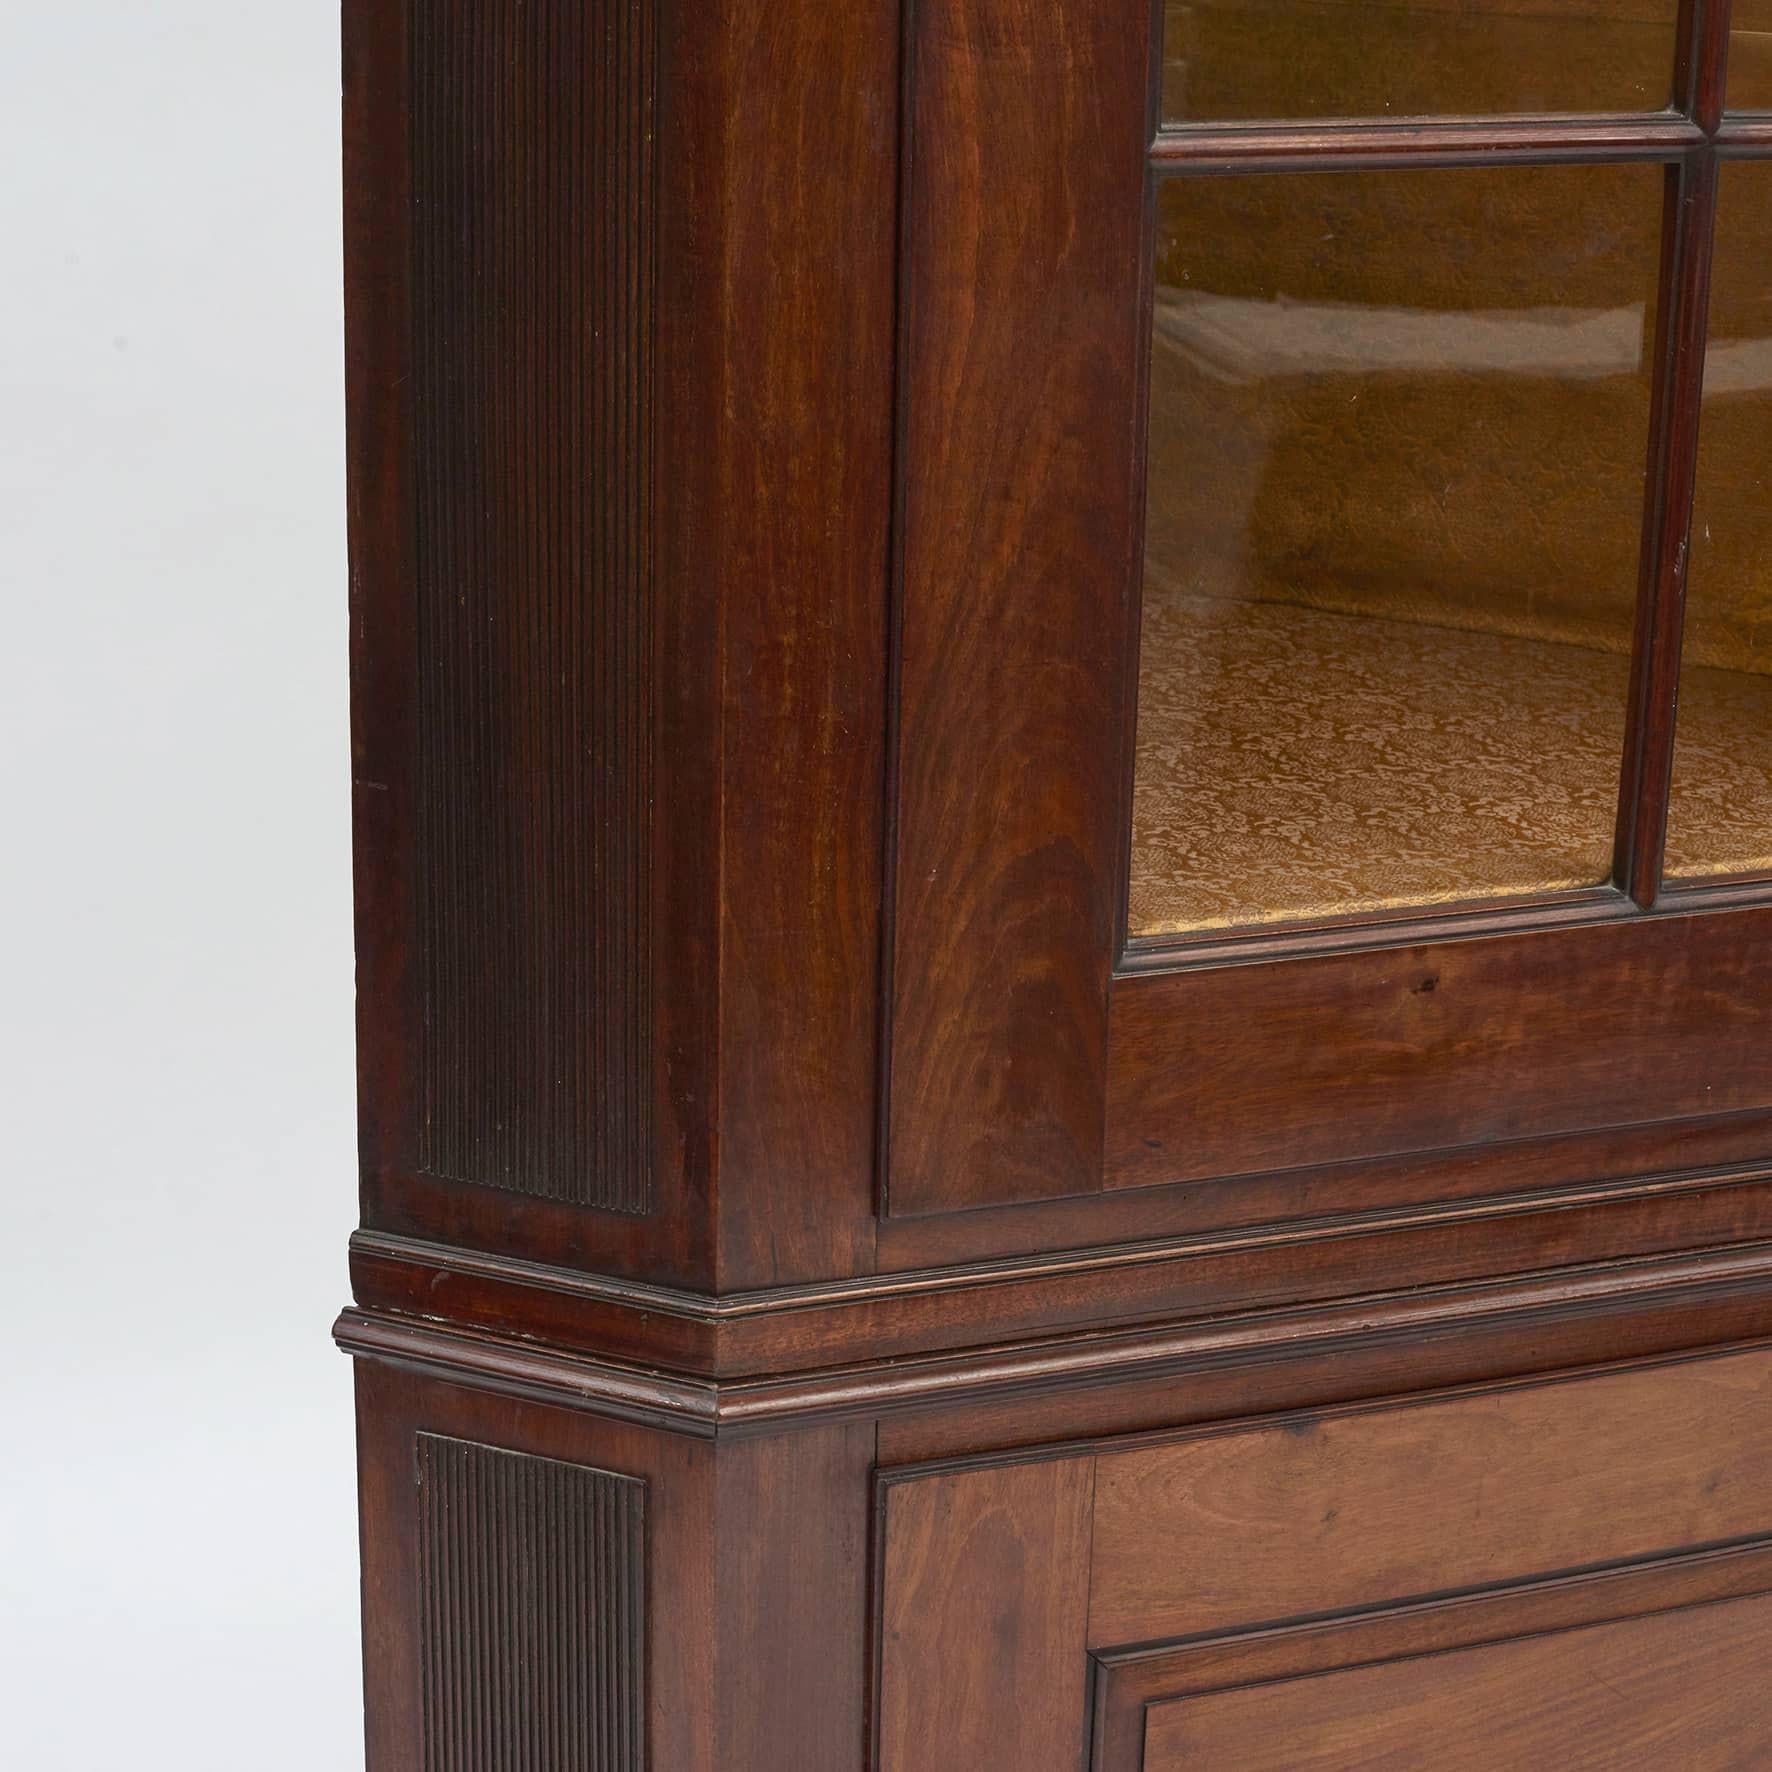 Danish Louis XVI mahogany corner cabinet. Excellent craftsmanship.
In two parts: The upper section with molded dentil cornice above pane glass door. The lower section with paneled door with storage inside. The cabinet has fluted side posts.